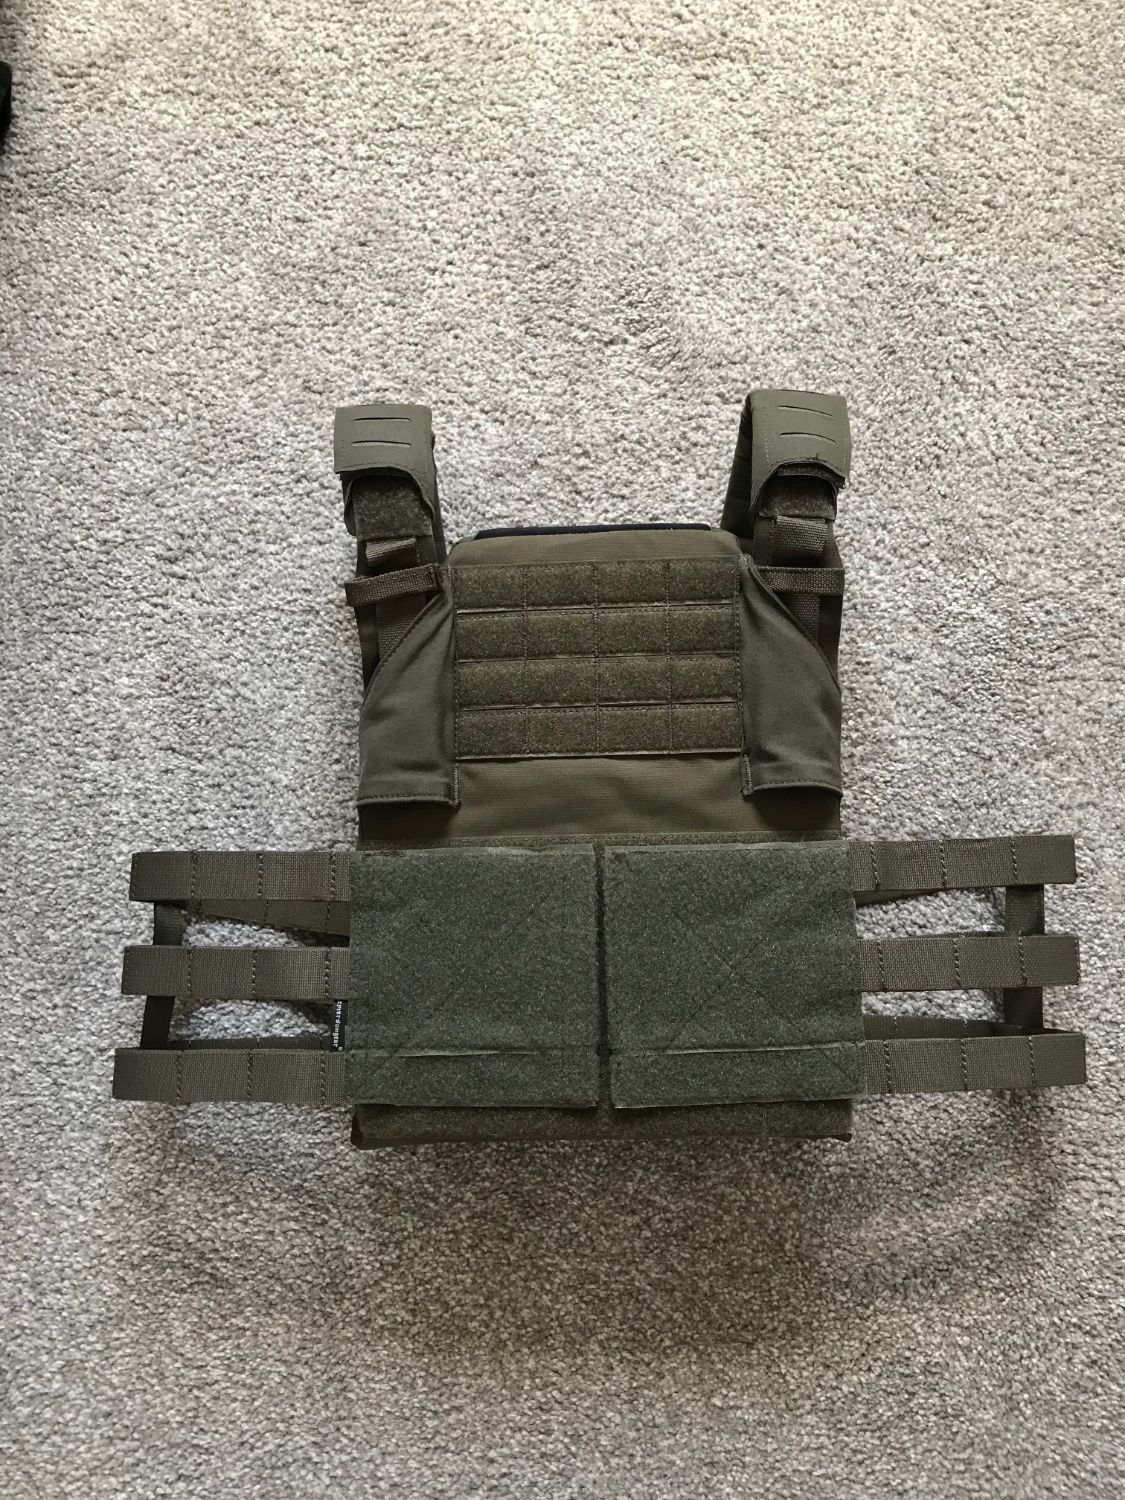 HSP Thorax Plate Carrier (PewTactical) - Gear - Airsoft Forums UK